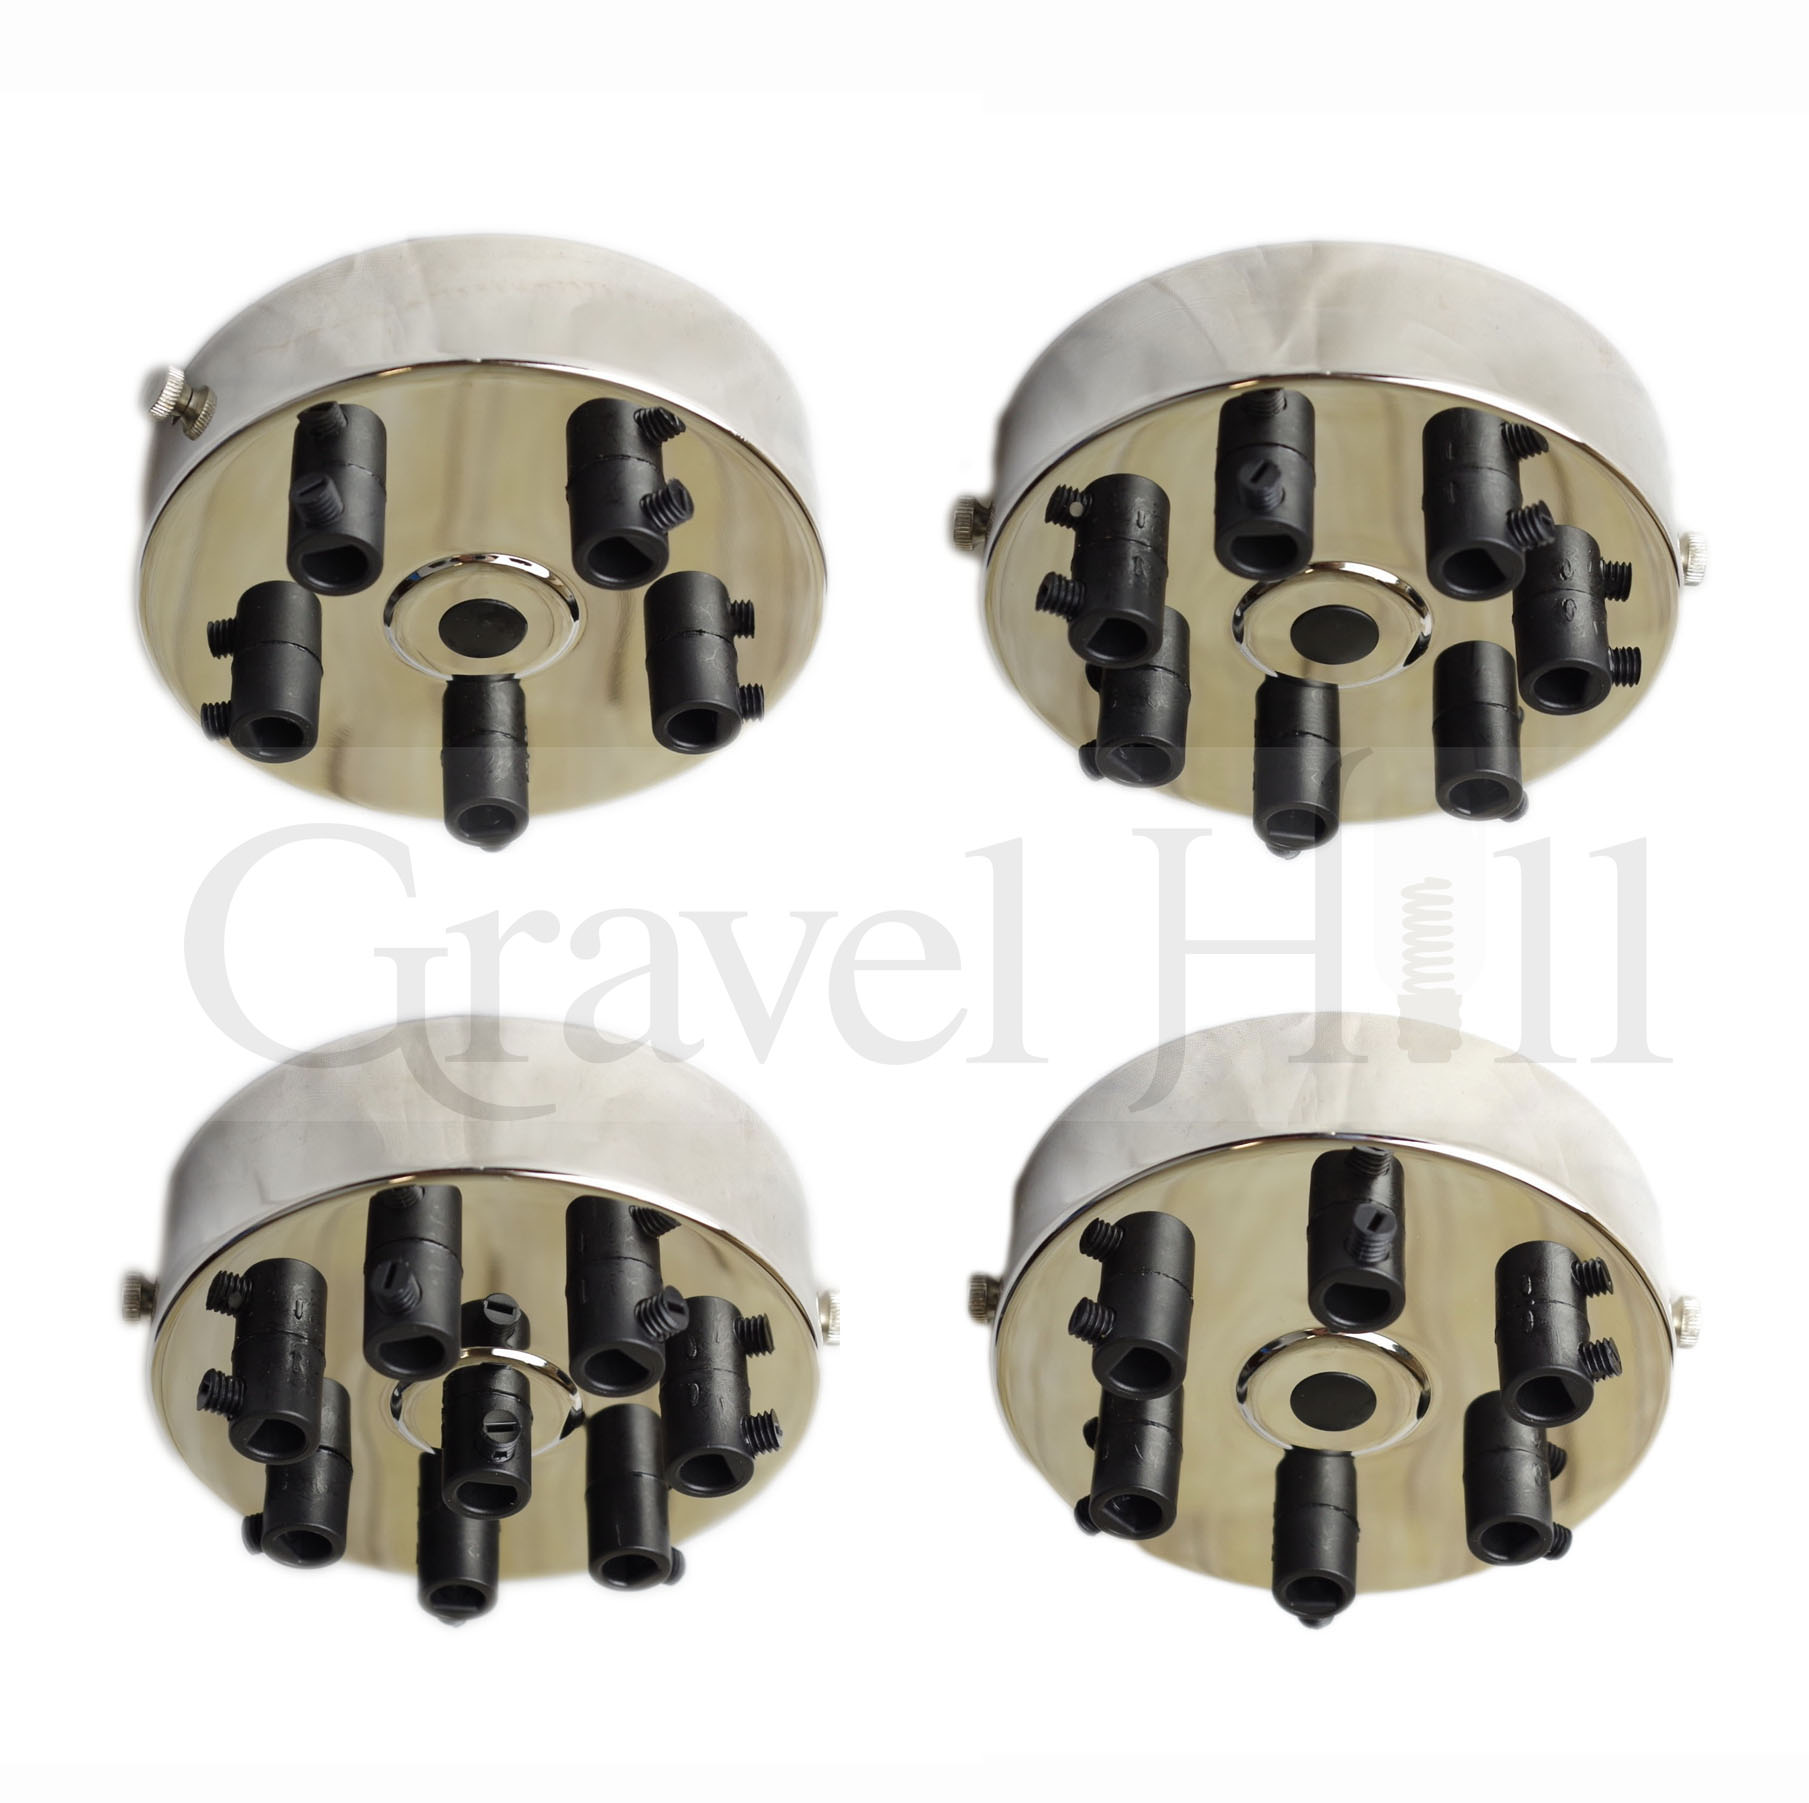 Multi Outlet Ceiling Rose Nickel With 1 9 Way Drop Options